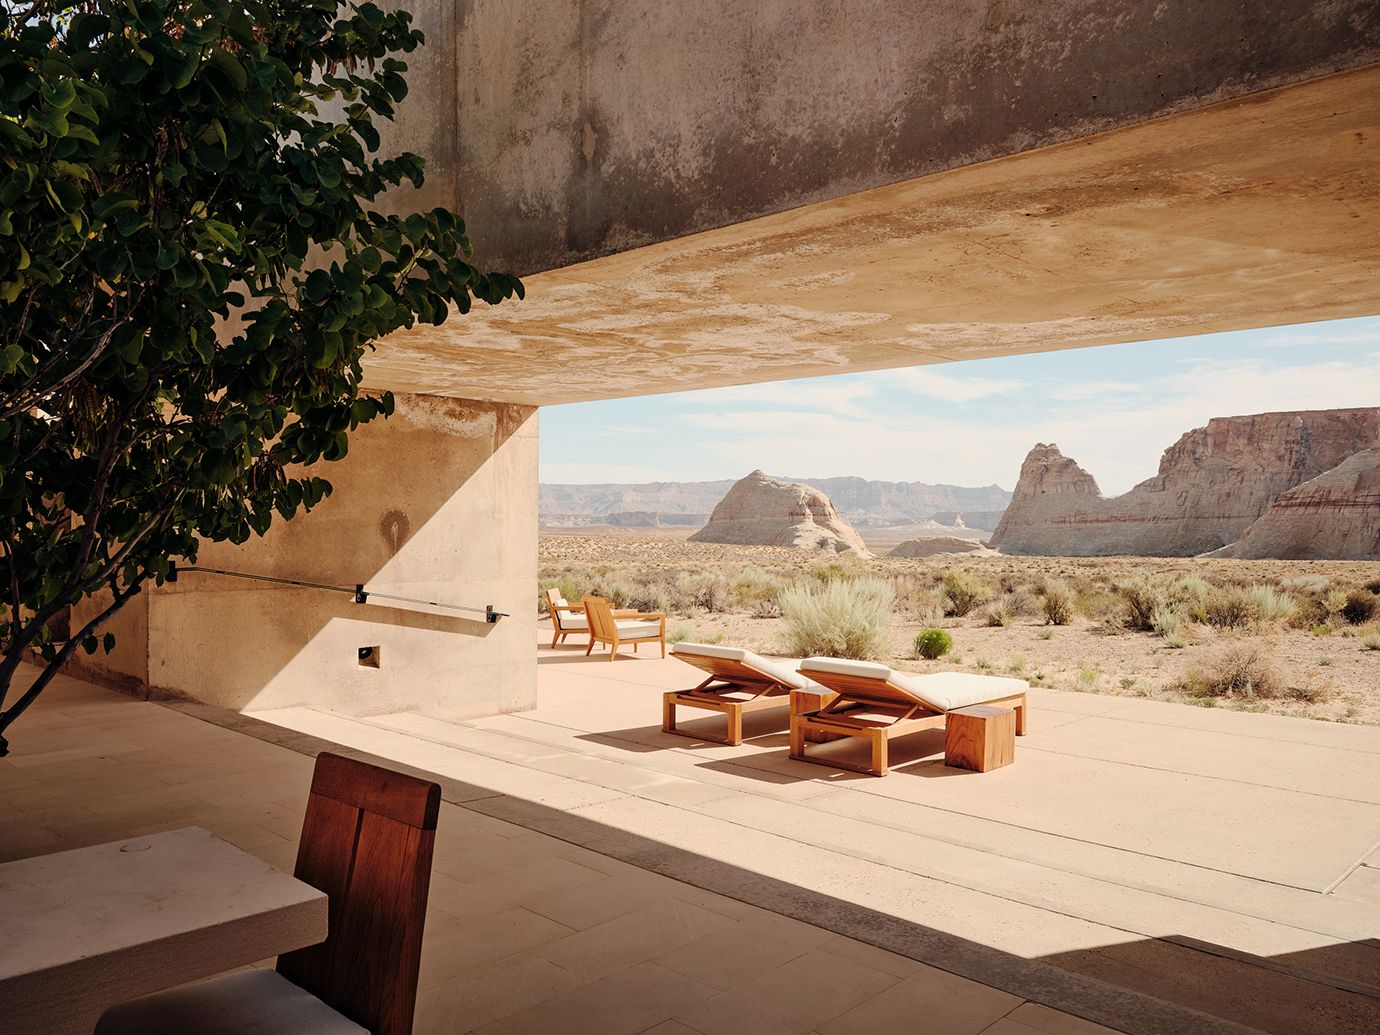 Photo of the desert from a room at Amangiri Resort